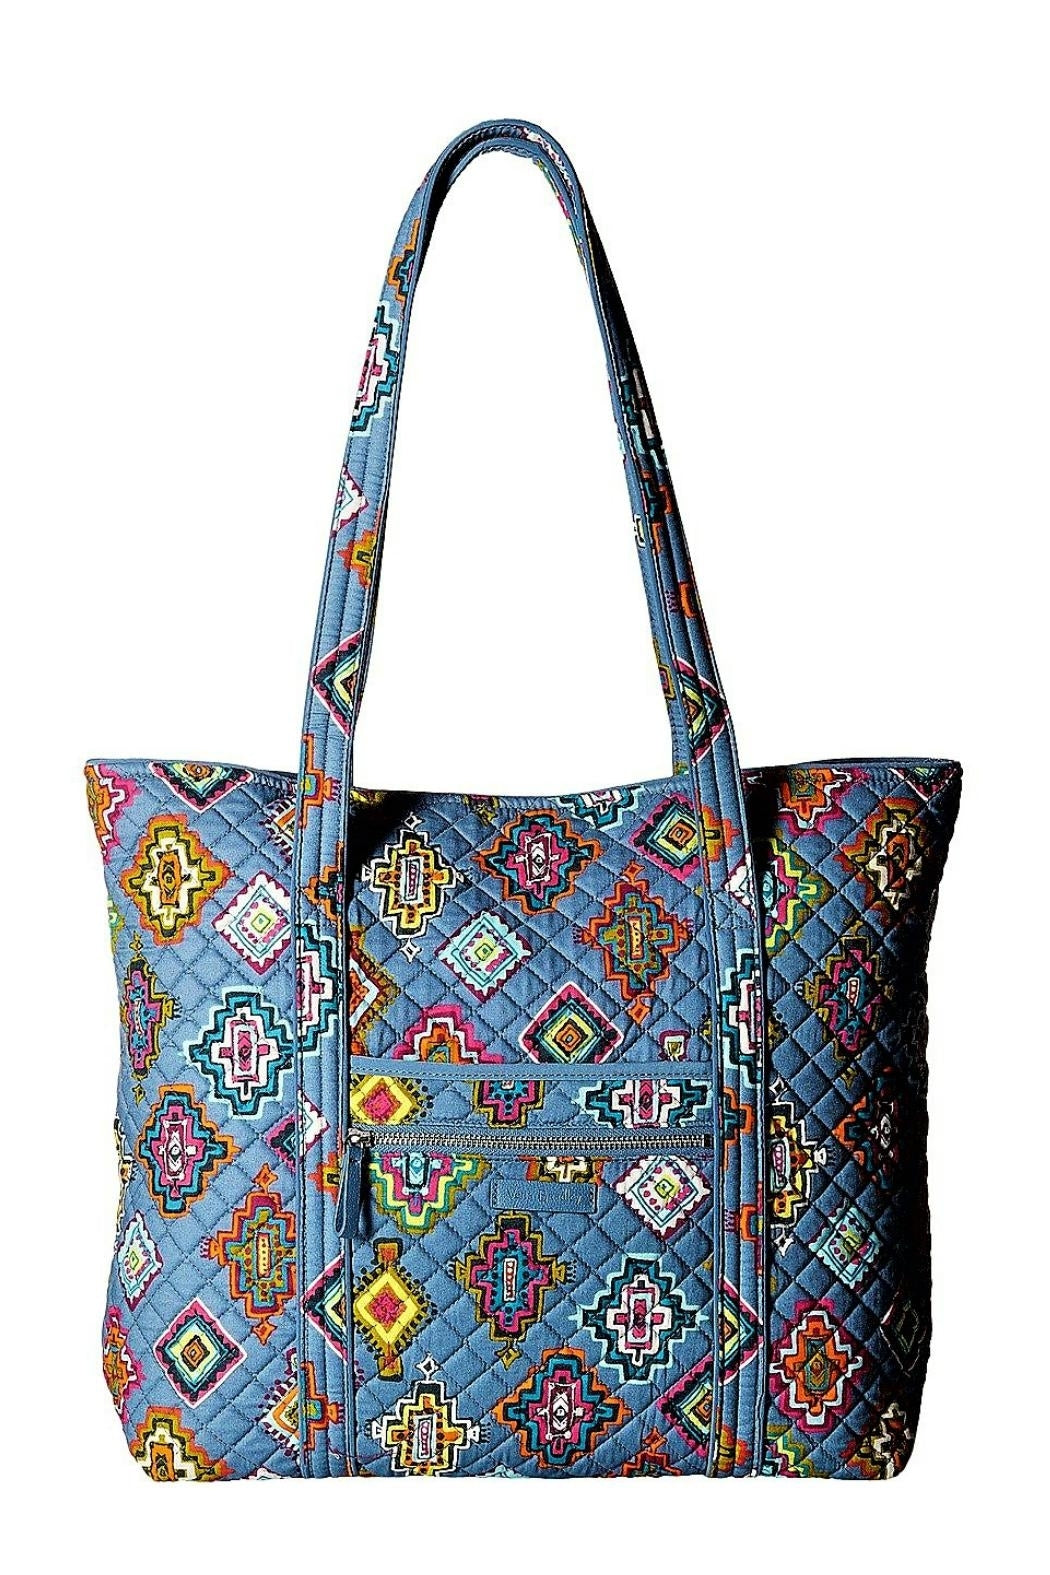 Vera Bradley's 40 years of patterned totes began with a knock at the door